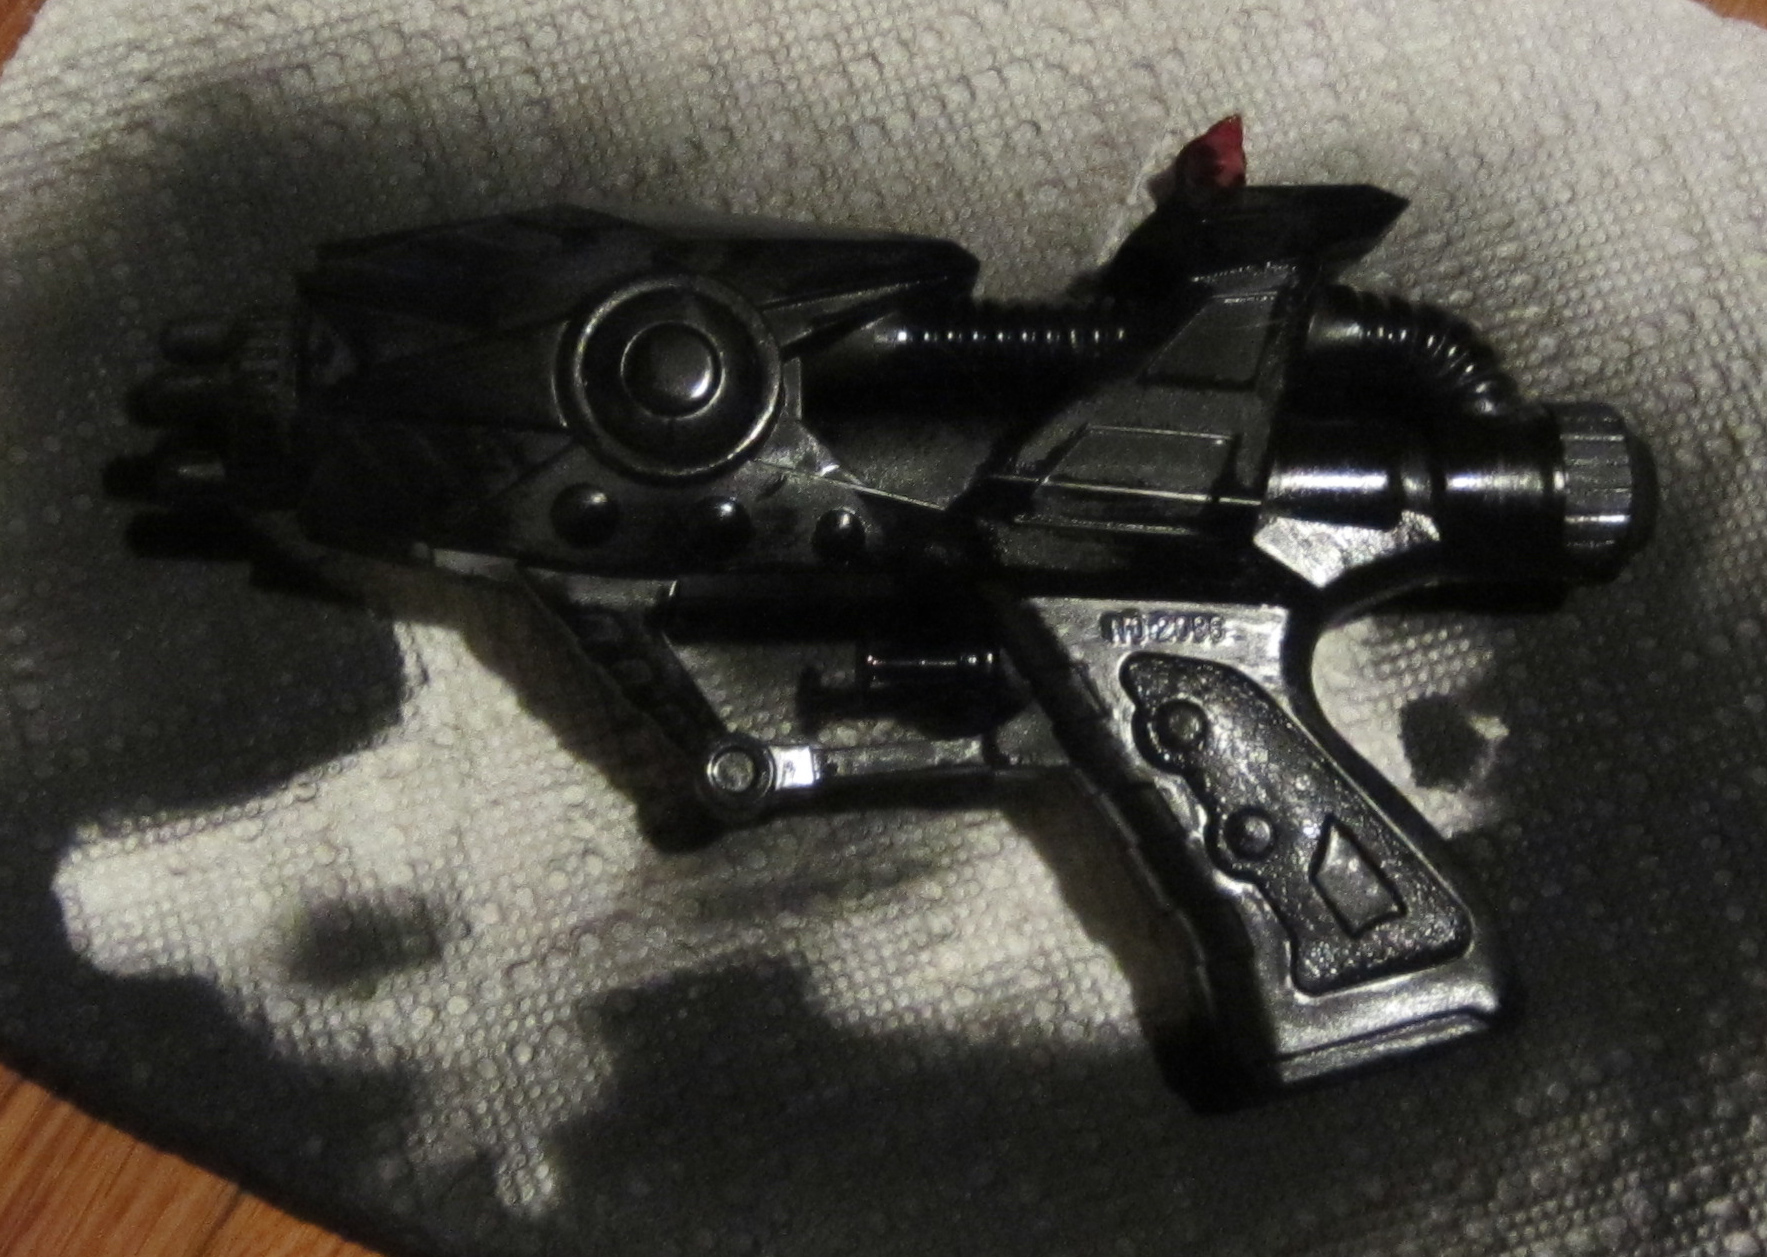 black toy gun with red bullet inside laying on rug